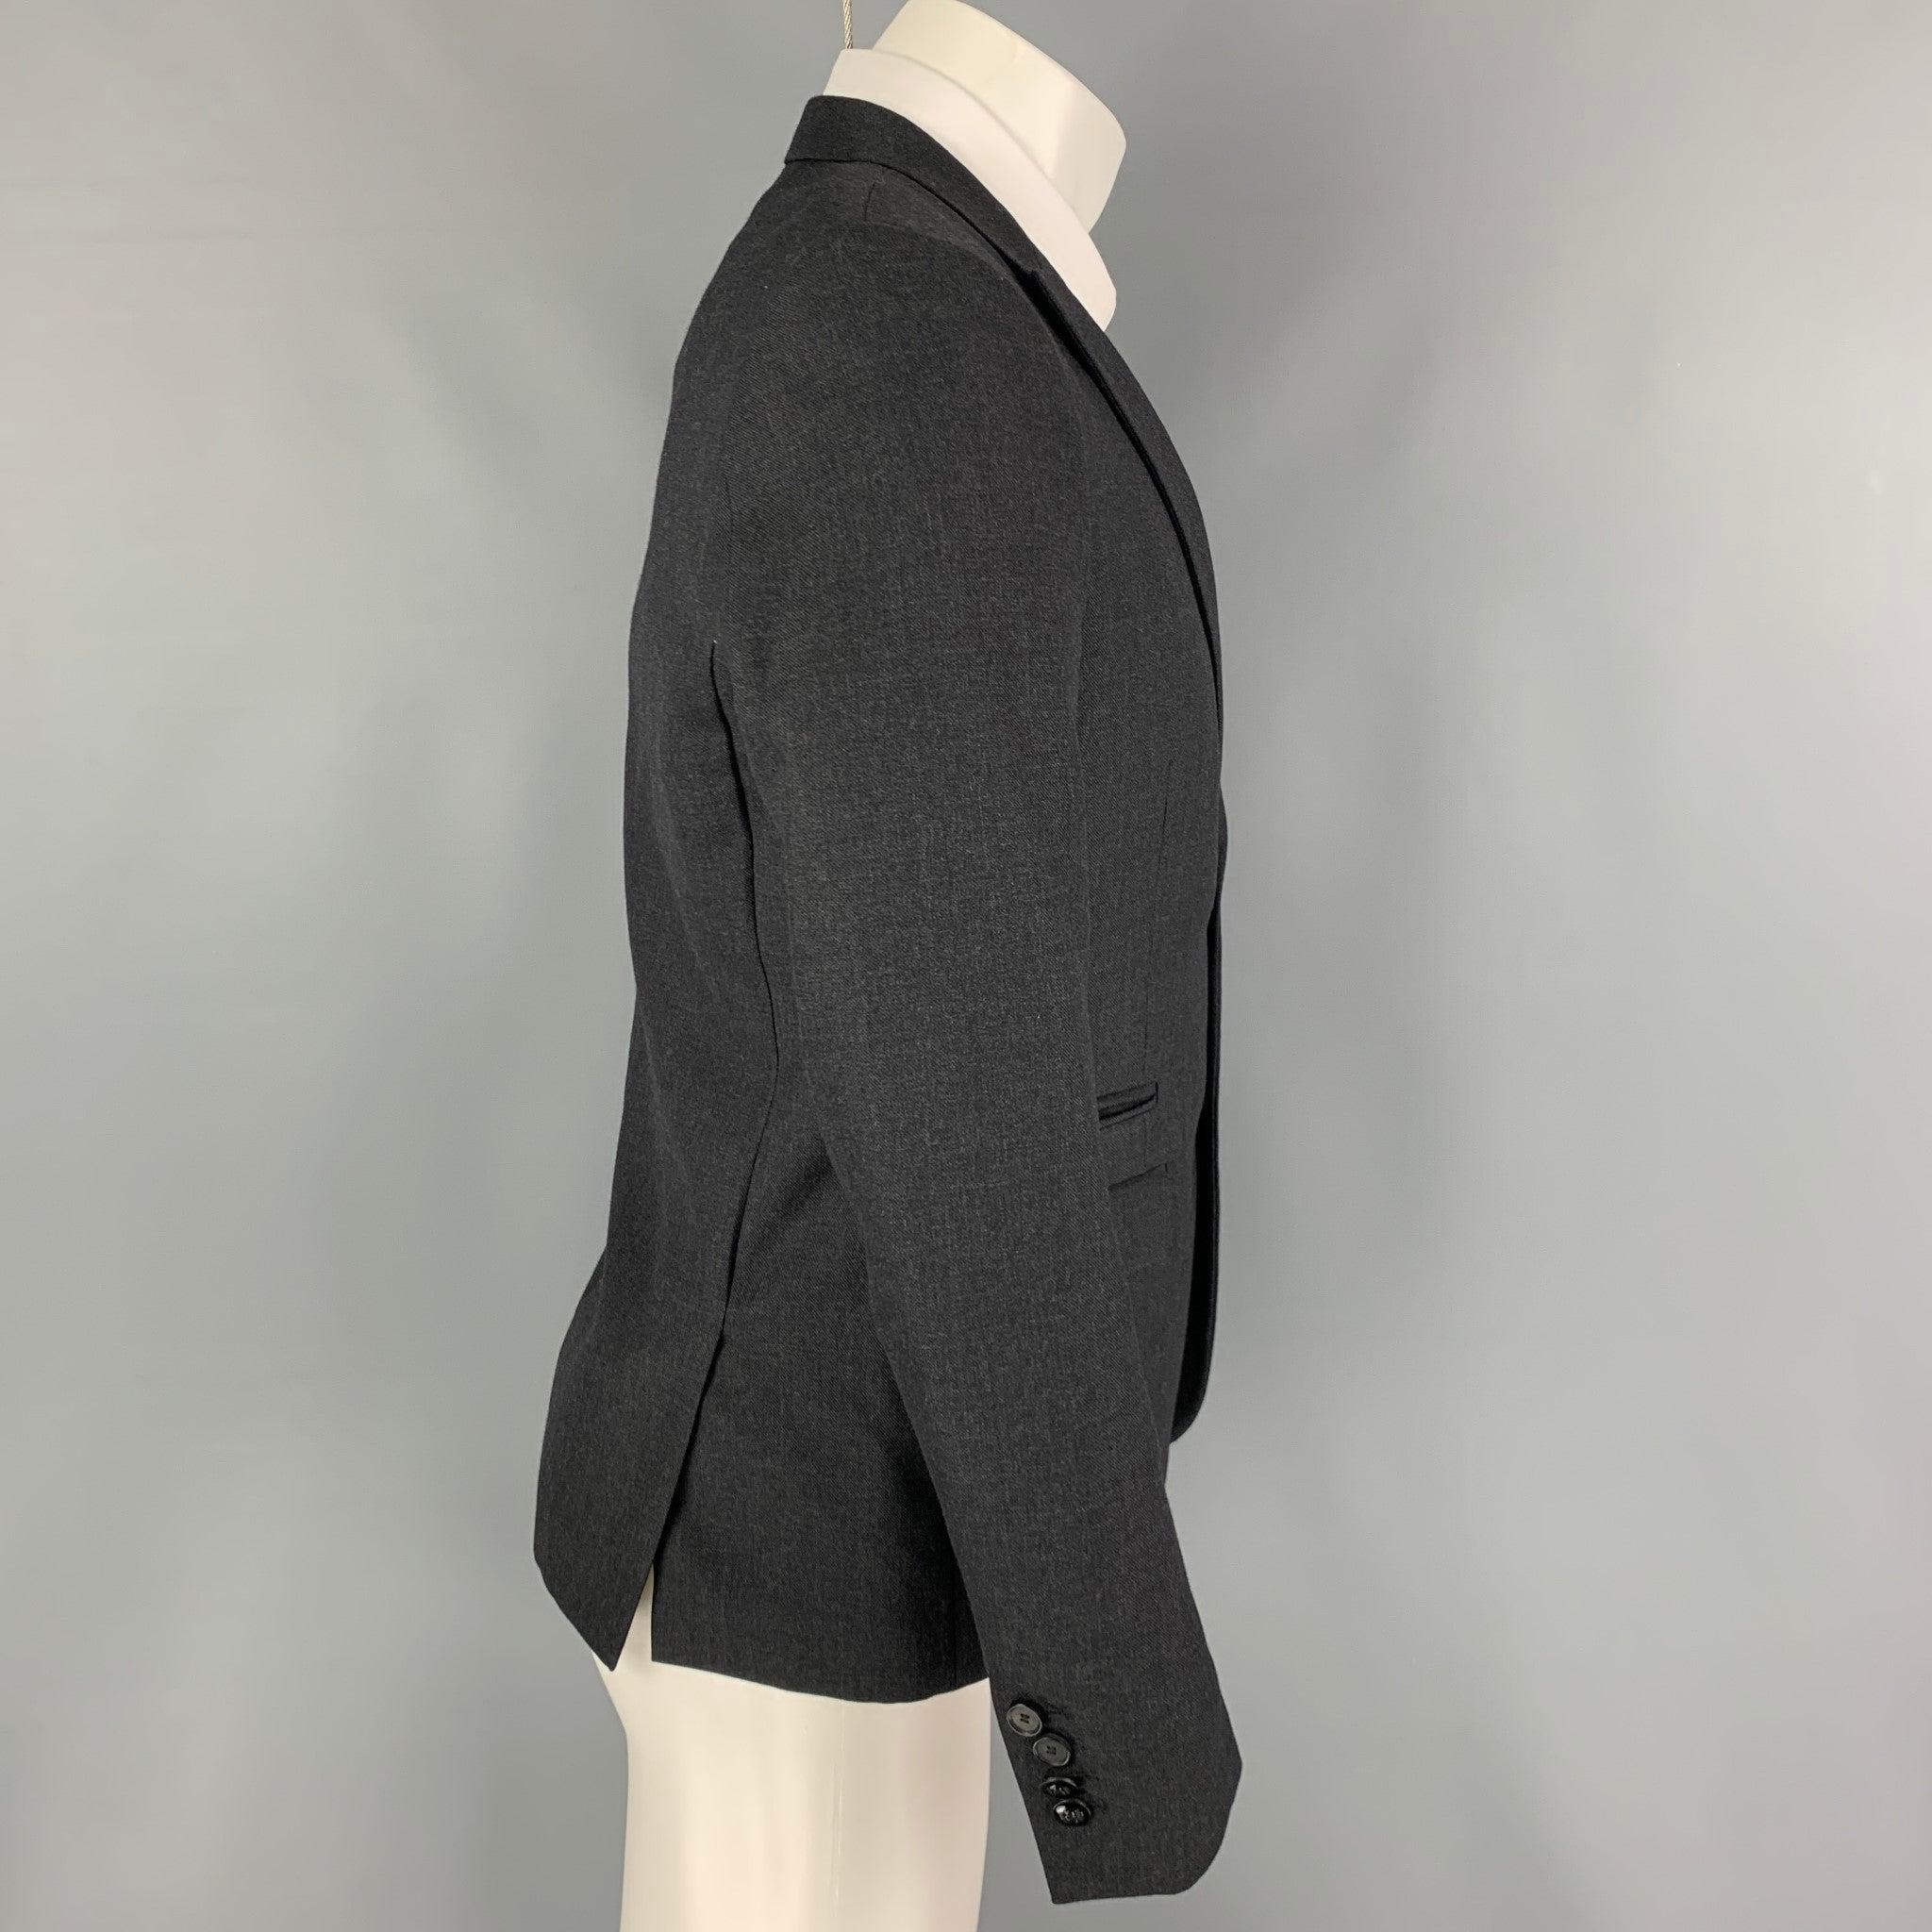 THE KOOPLES sport coat comes in a charcoal wool with a full liner featuring a peak lapel, flap pockets, double back vent, and a double button closure.
Excellent
Pre-Owned Condition. 

Marked:   46 

Measurements: 
 
Shoulder: 16 inches Chest: 36